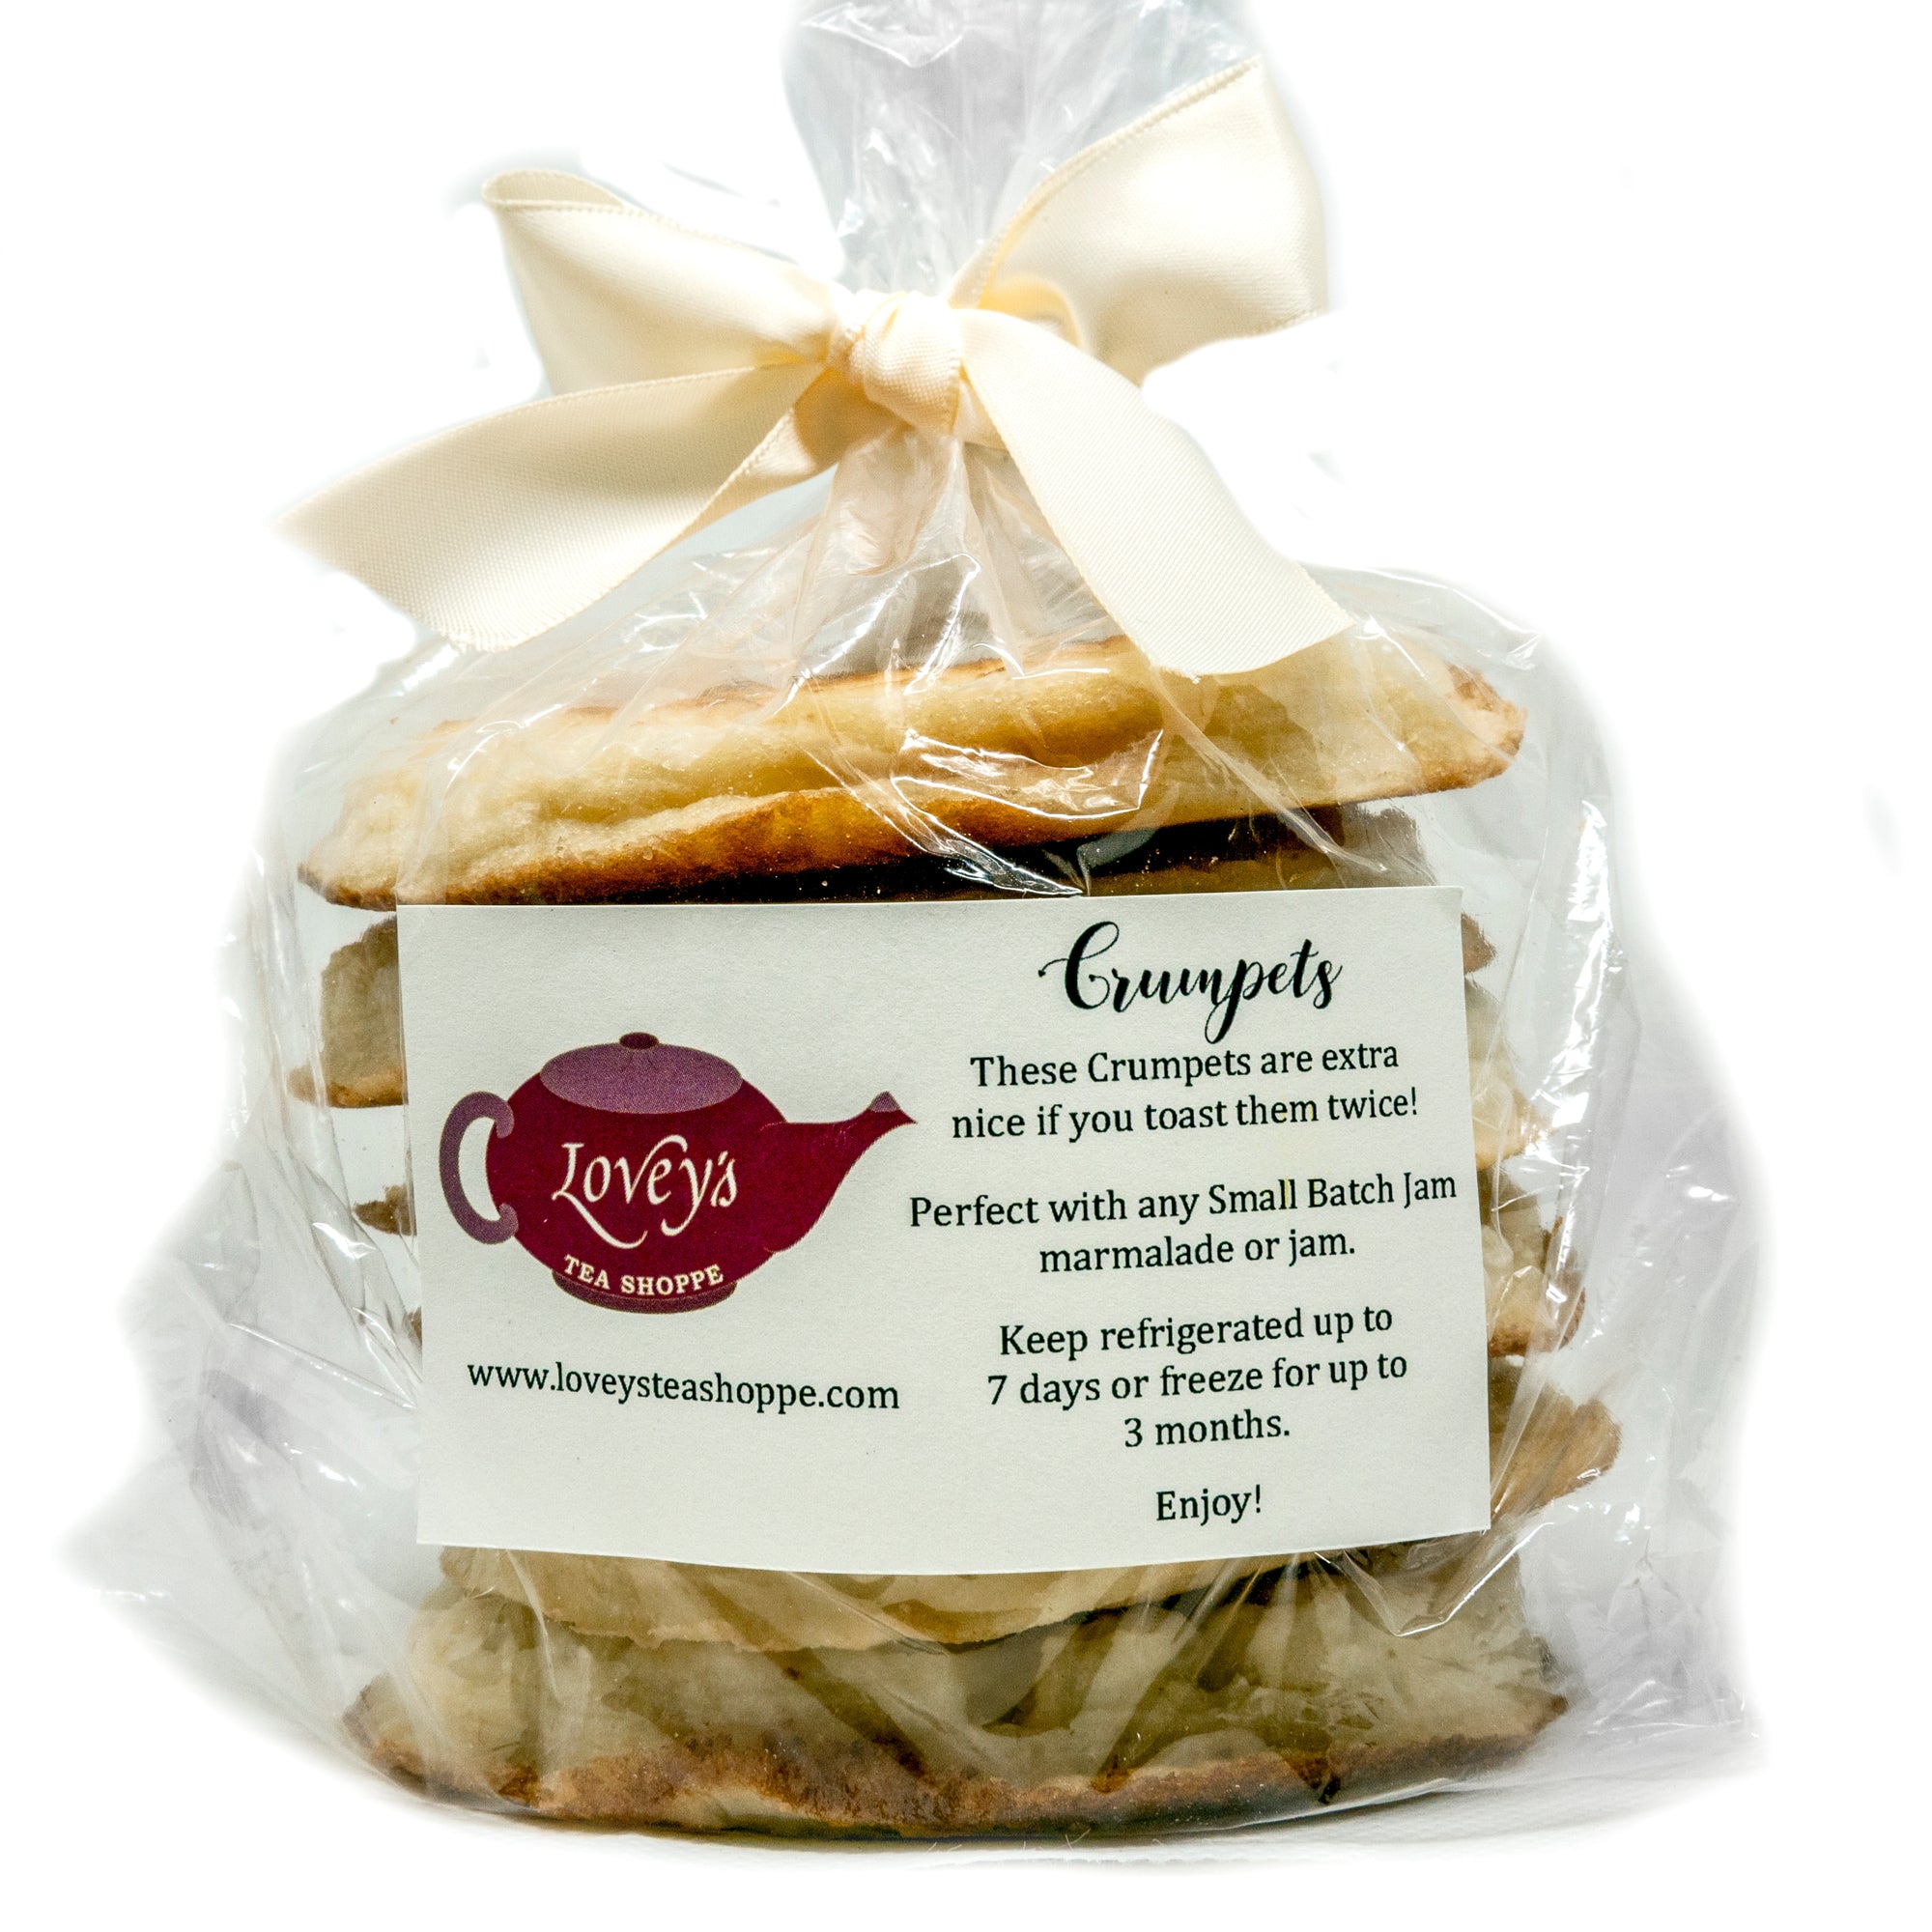 Lovey's Tea Shoppe Crumpets - 6 Pack